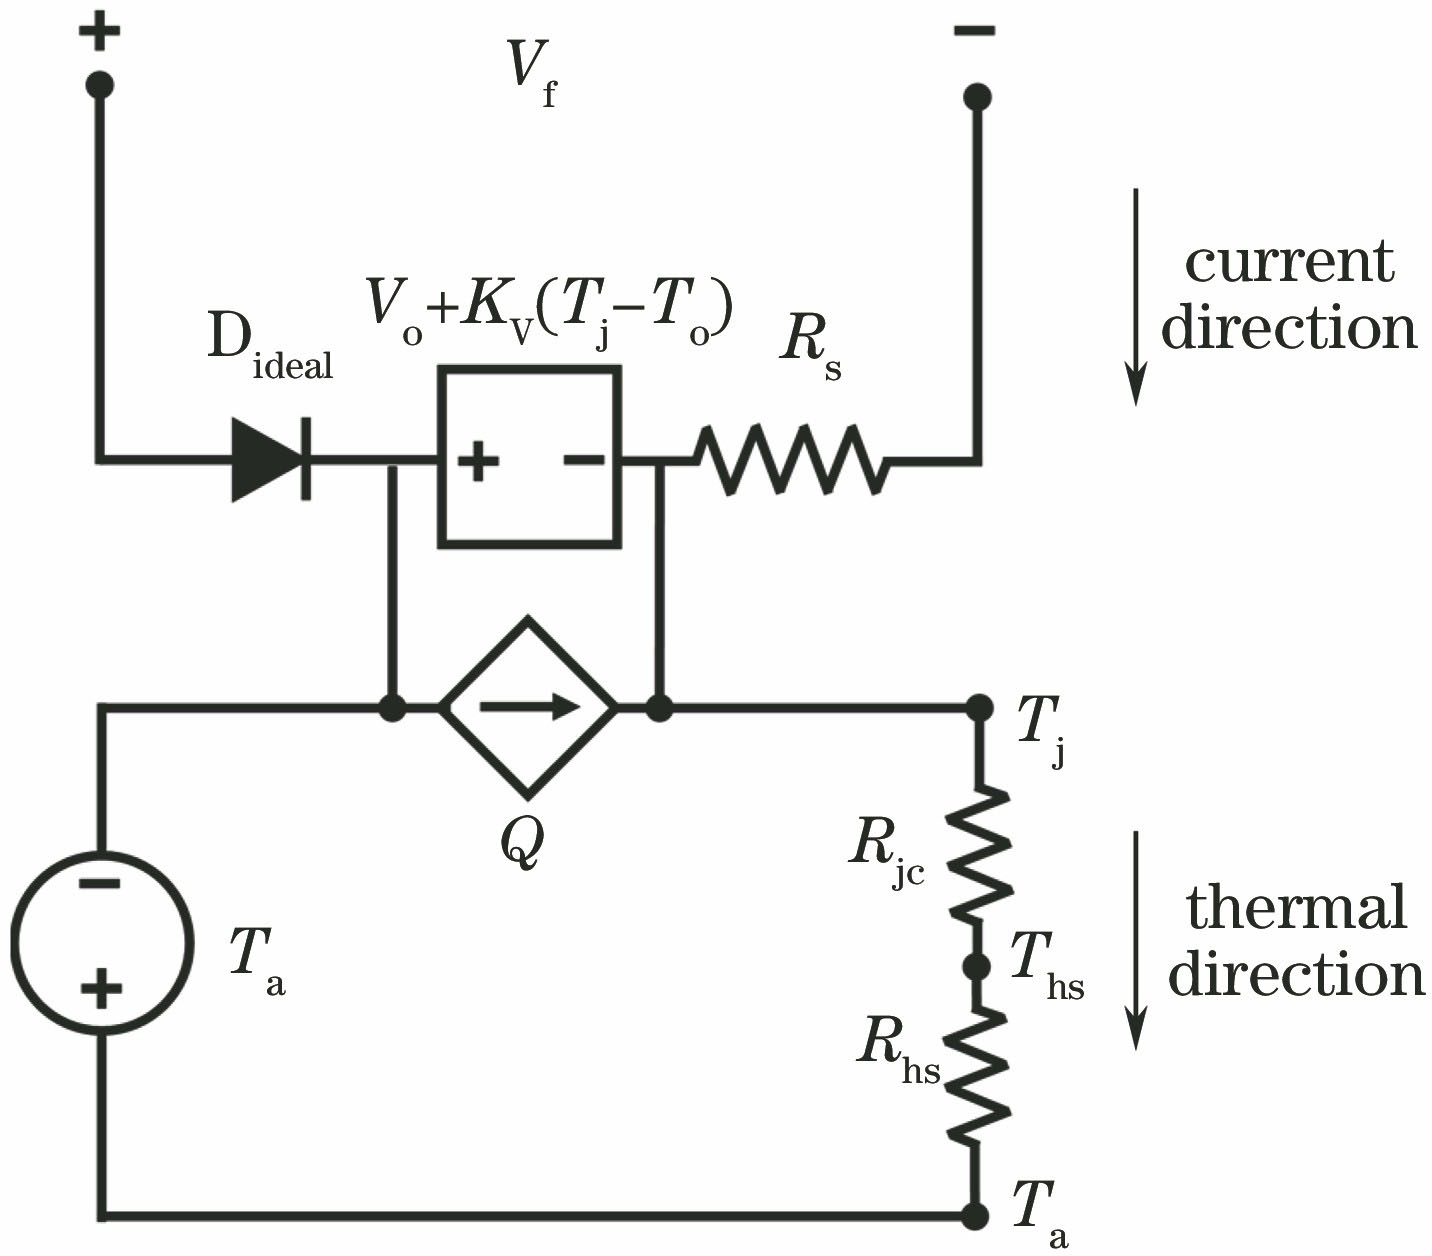 Equivalent circuit diagram of micro LED array